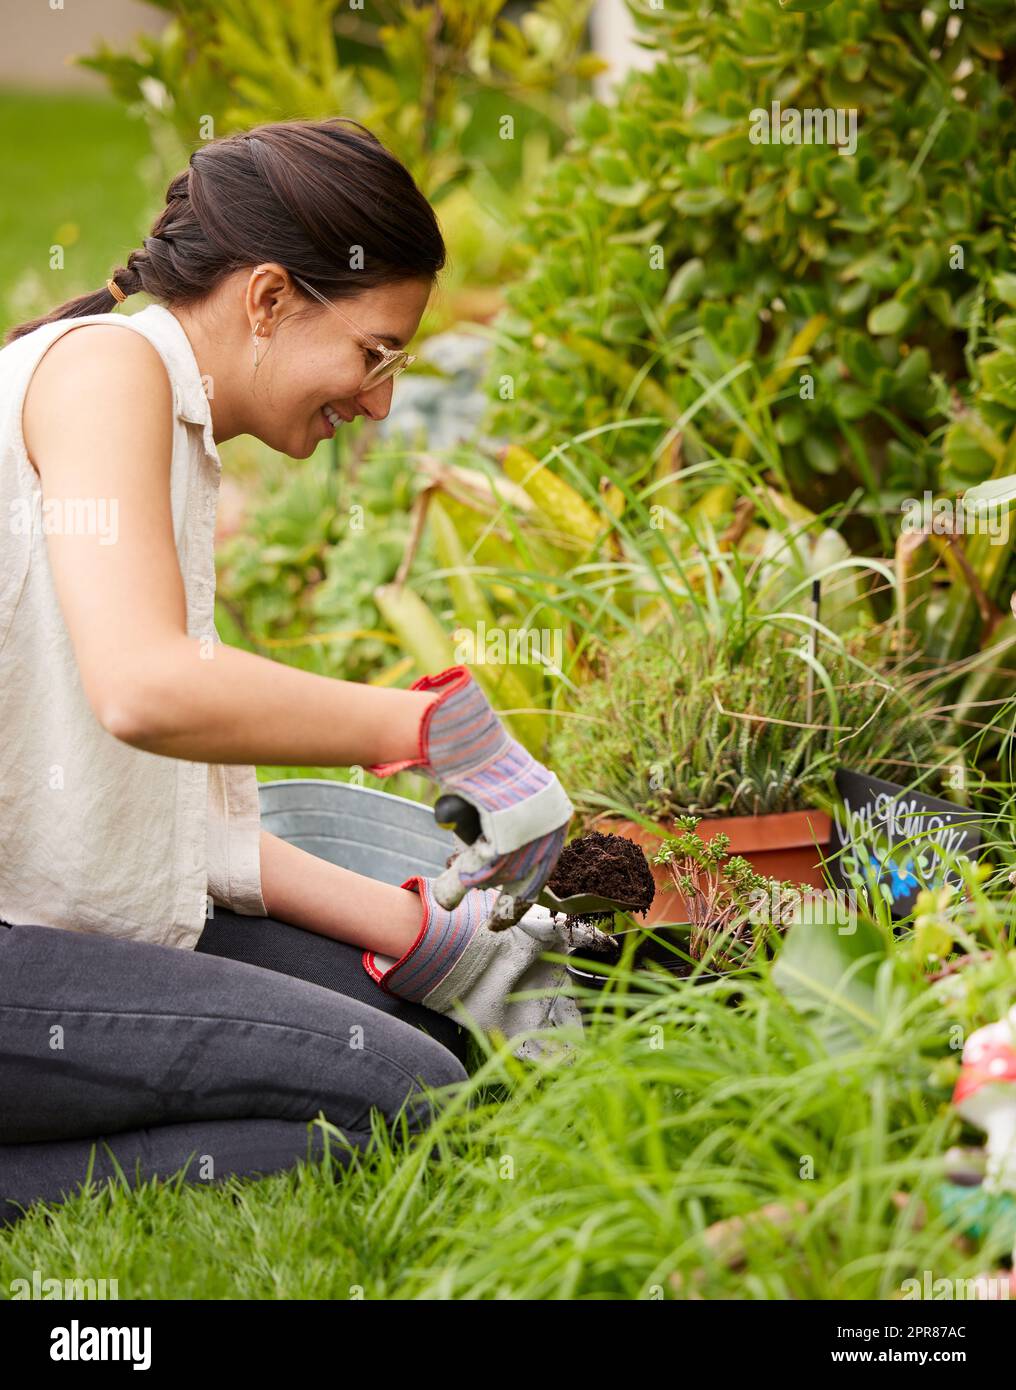 Make hay while the sun shines. an attractive young woman digging with a trowel while doing some gardening at home. Stock Photo